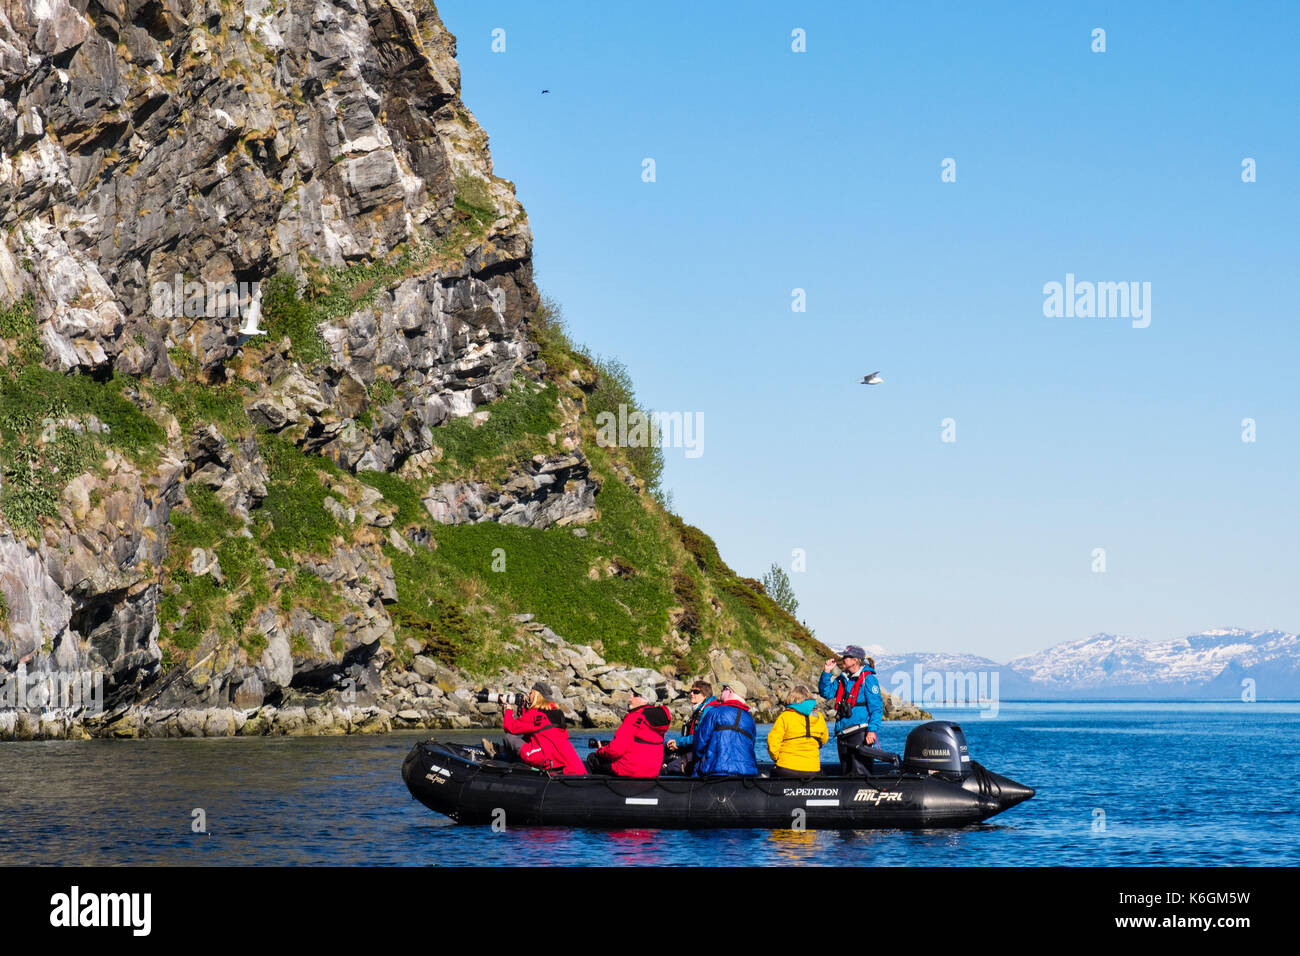 G Adventures Expedition cruise passengers in Zodiac dinghy visiting nesting Kittiwakes on sea cliffs in summer. Sundsvollsundet Nature Reserve, Norway Stock Photo